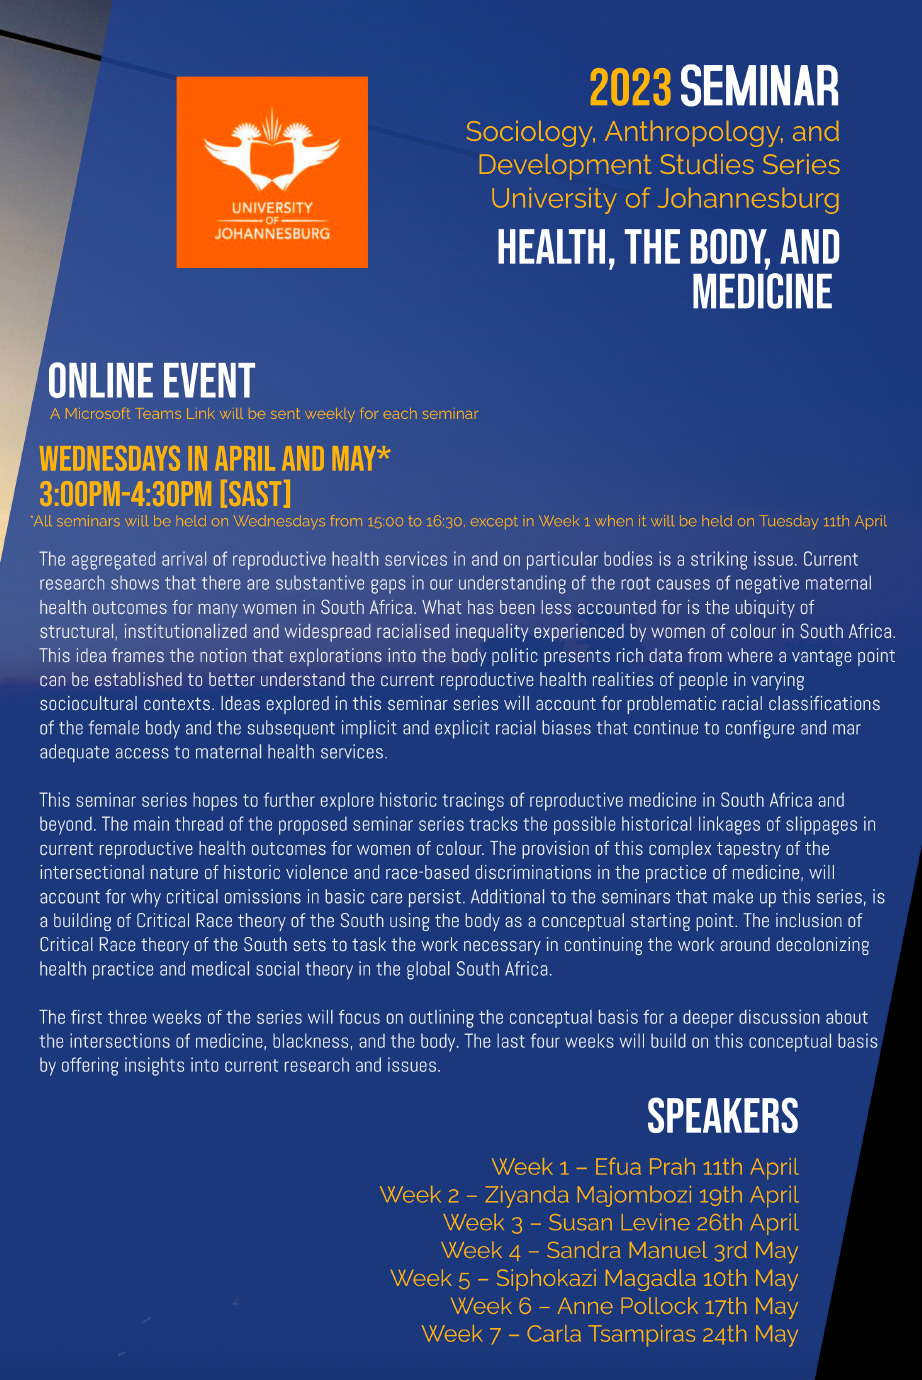 Poster of health, the body, and medicine conference